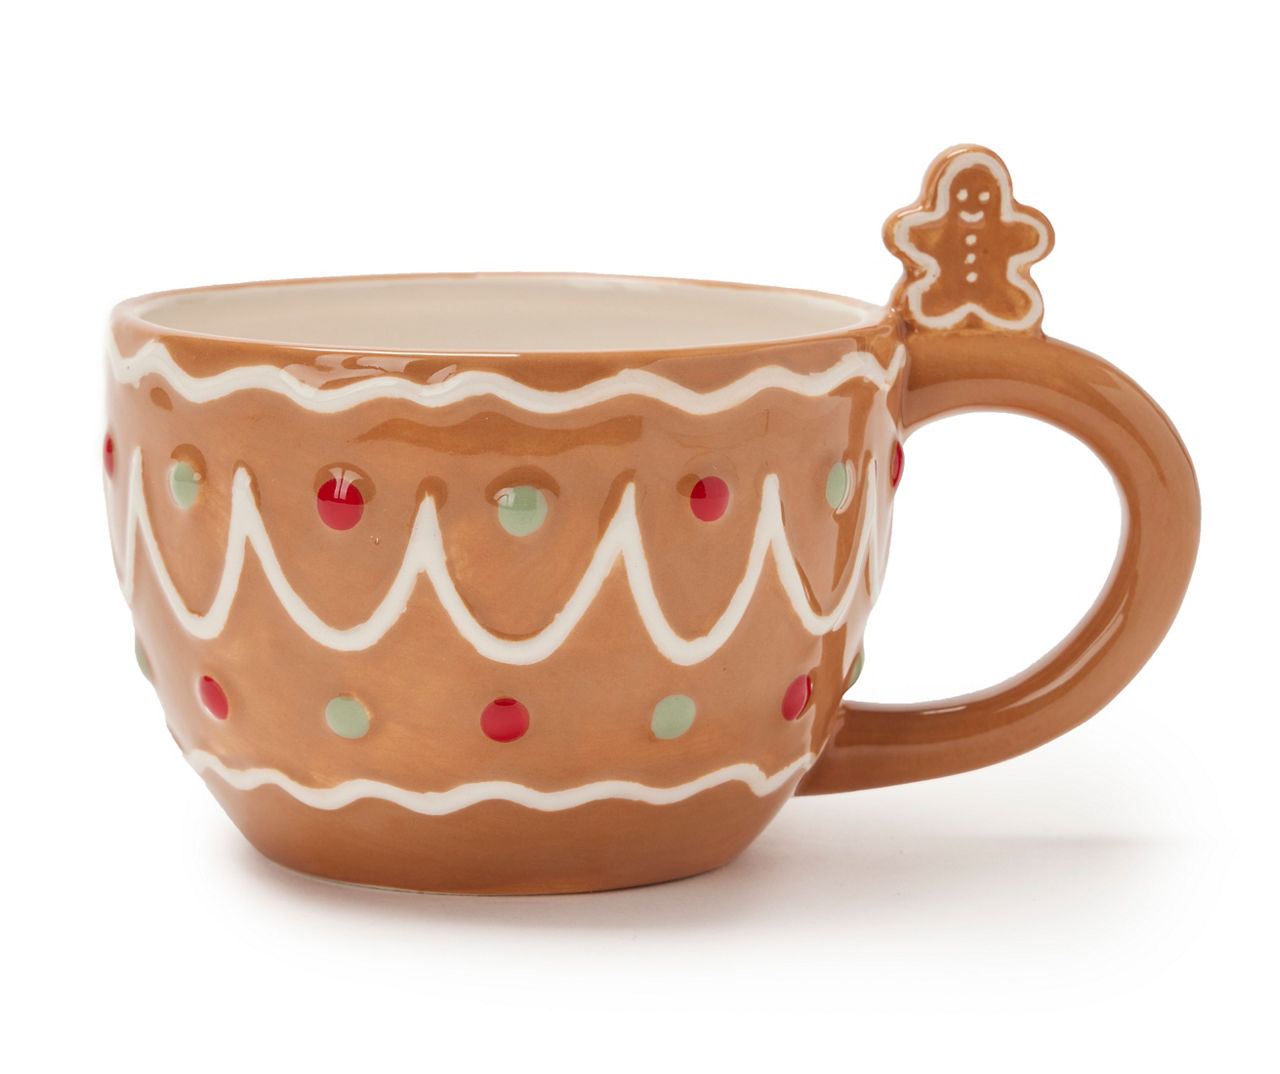 Gingerbread Man to Go Cups